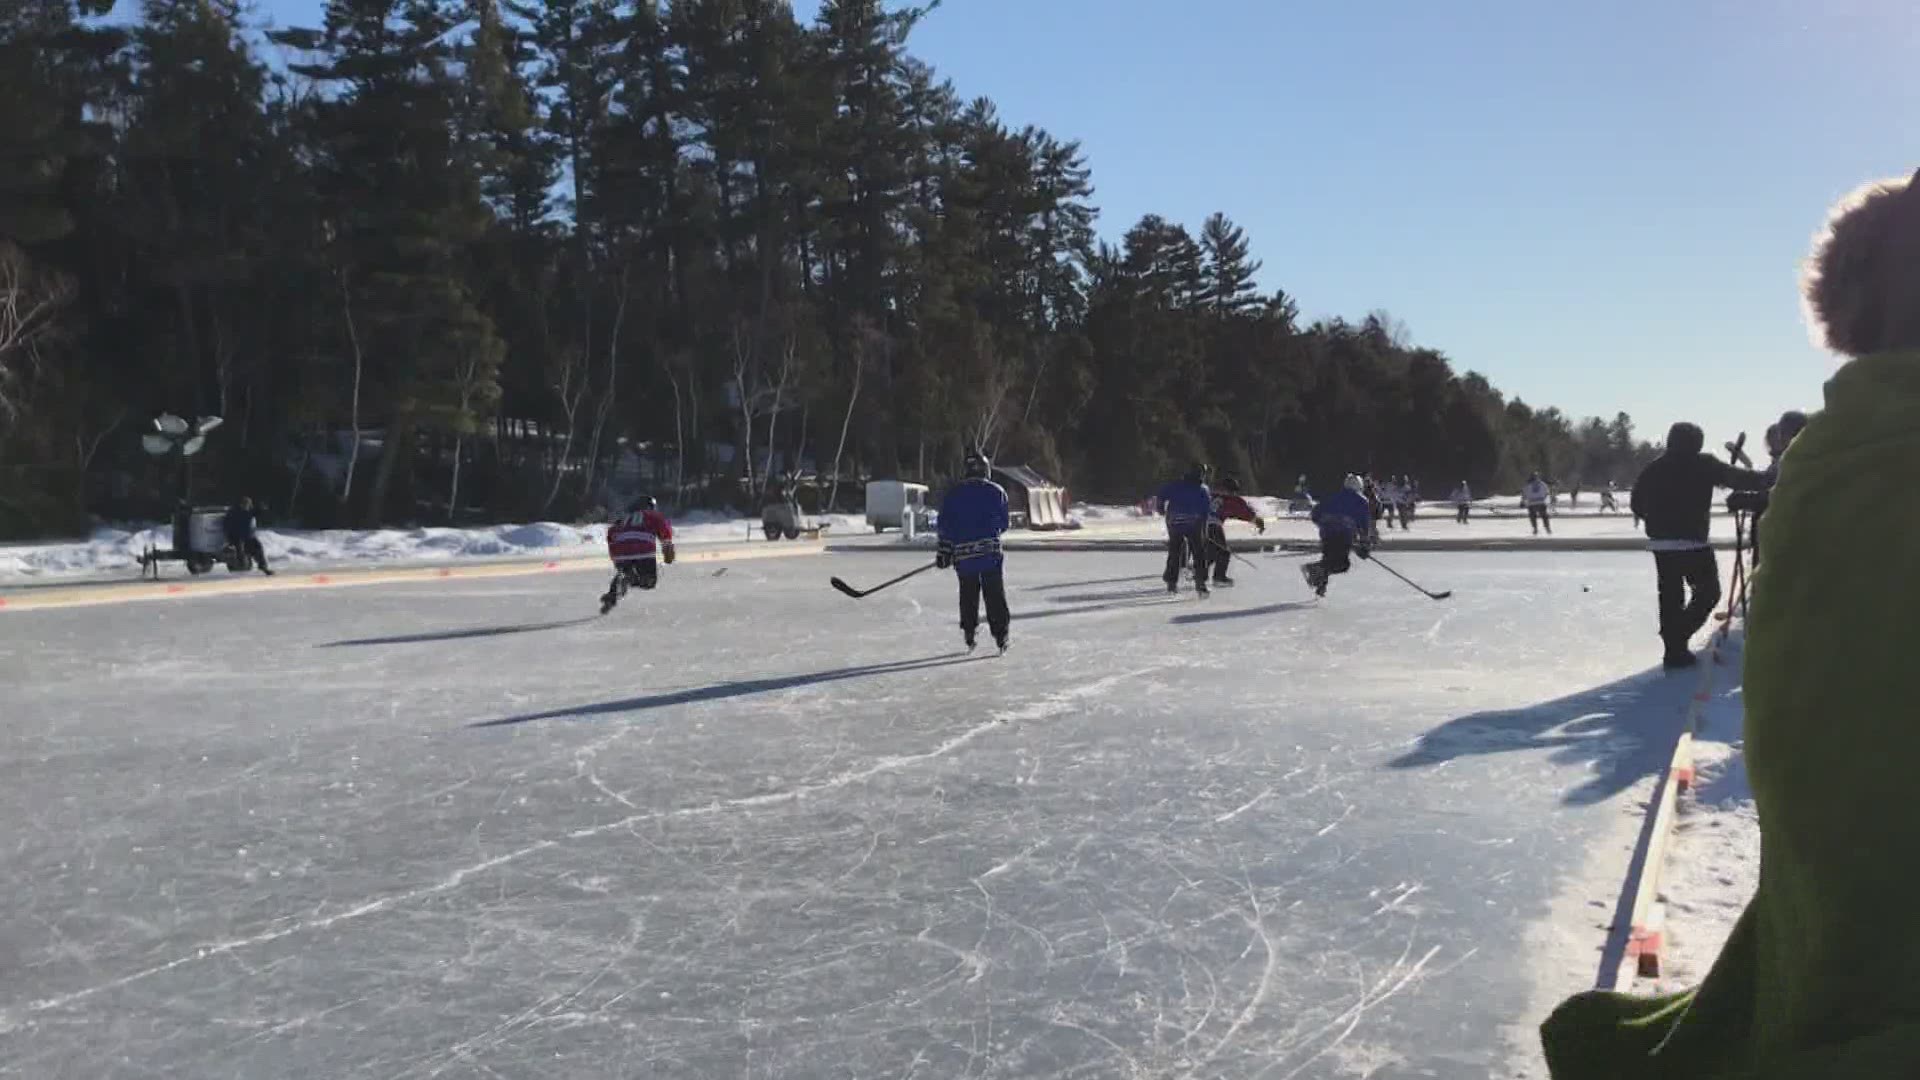 The annual pond hockey tournament is one of the largest fundraisers for the Alfond Youth and Community Center.